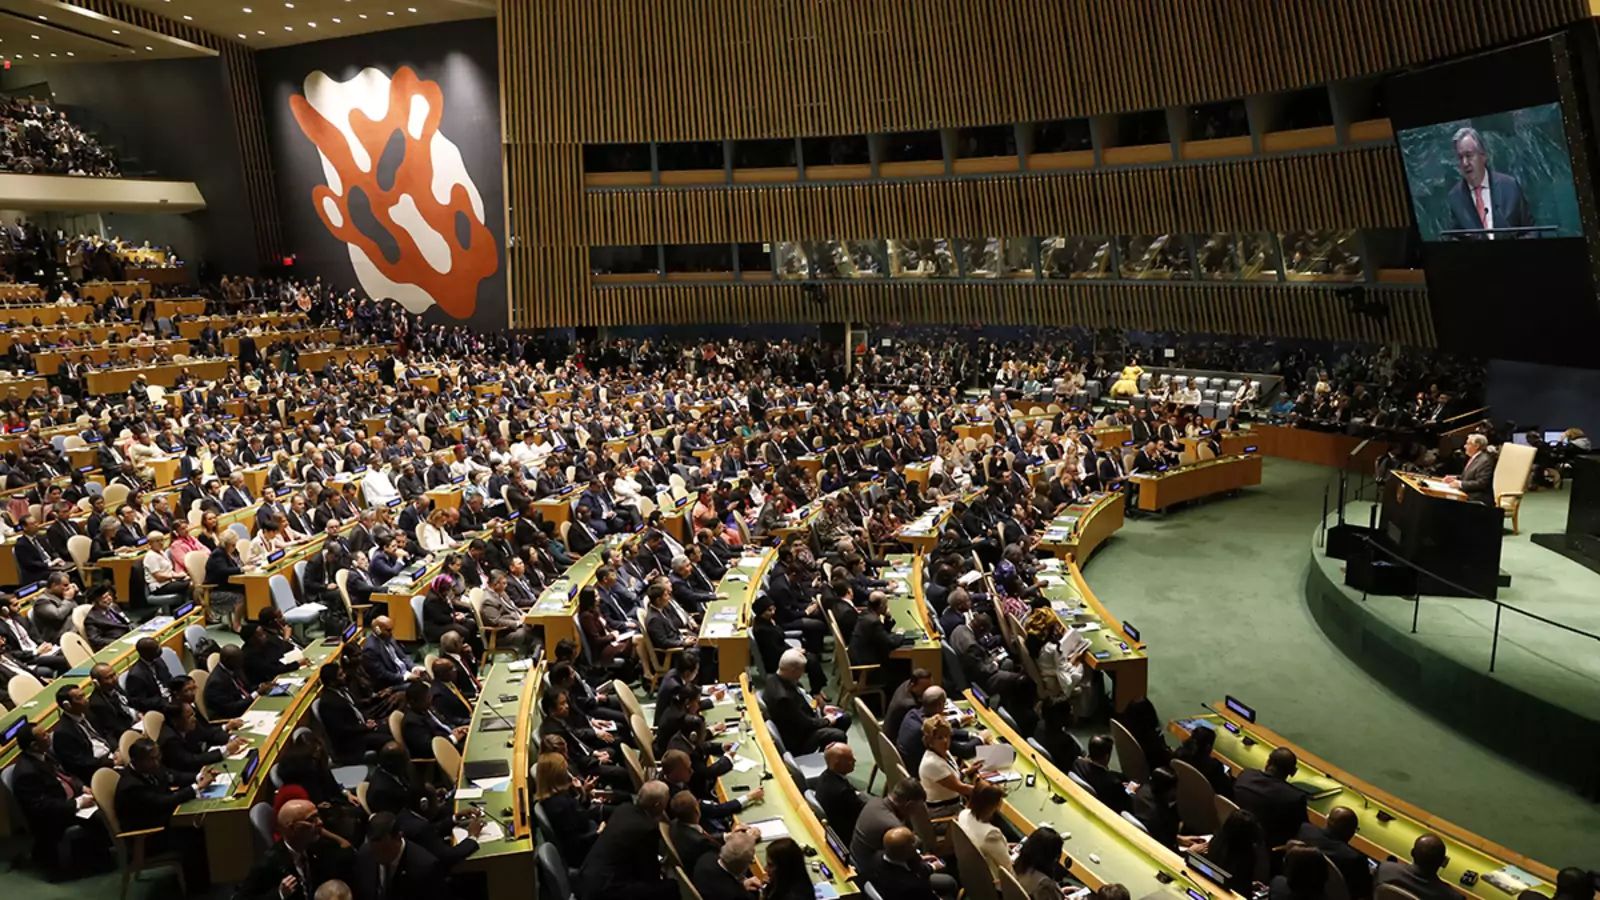 Main themes for 2021's UN Assembly meeting